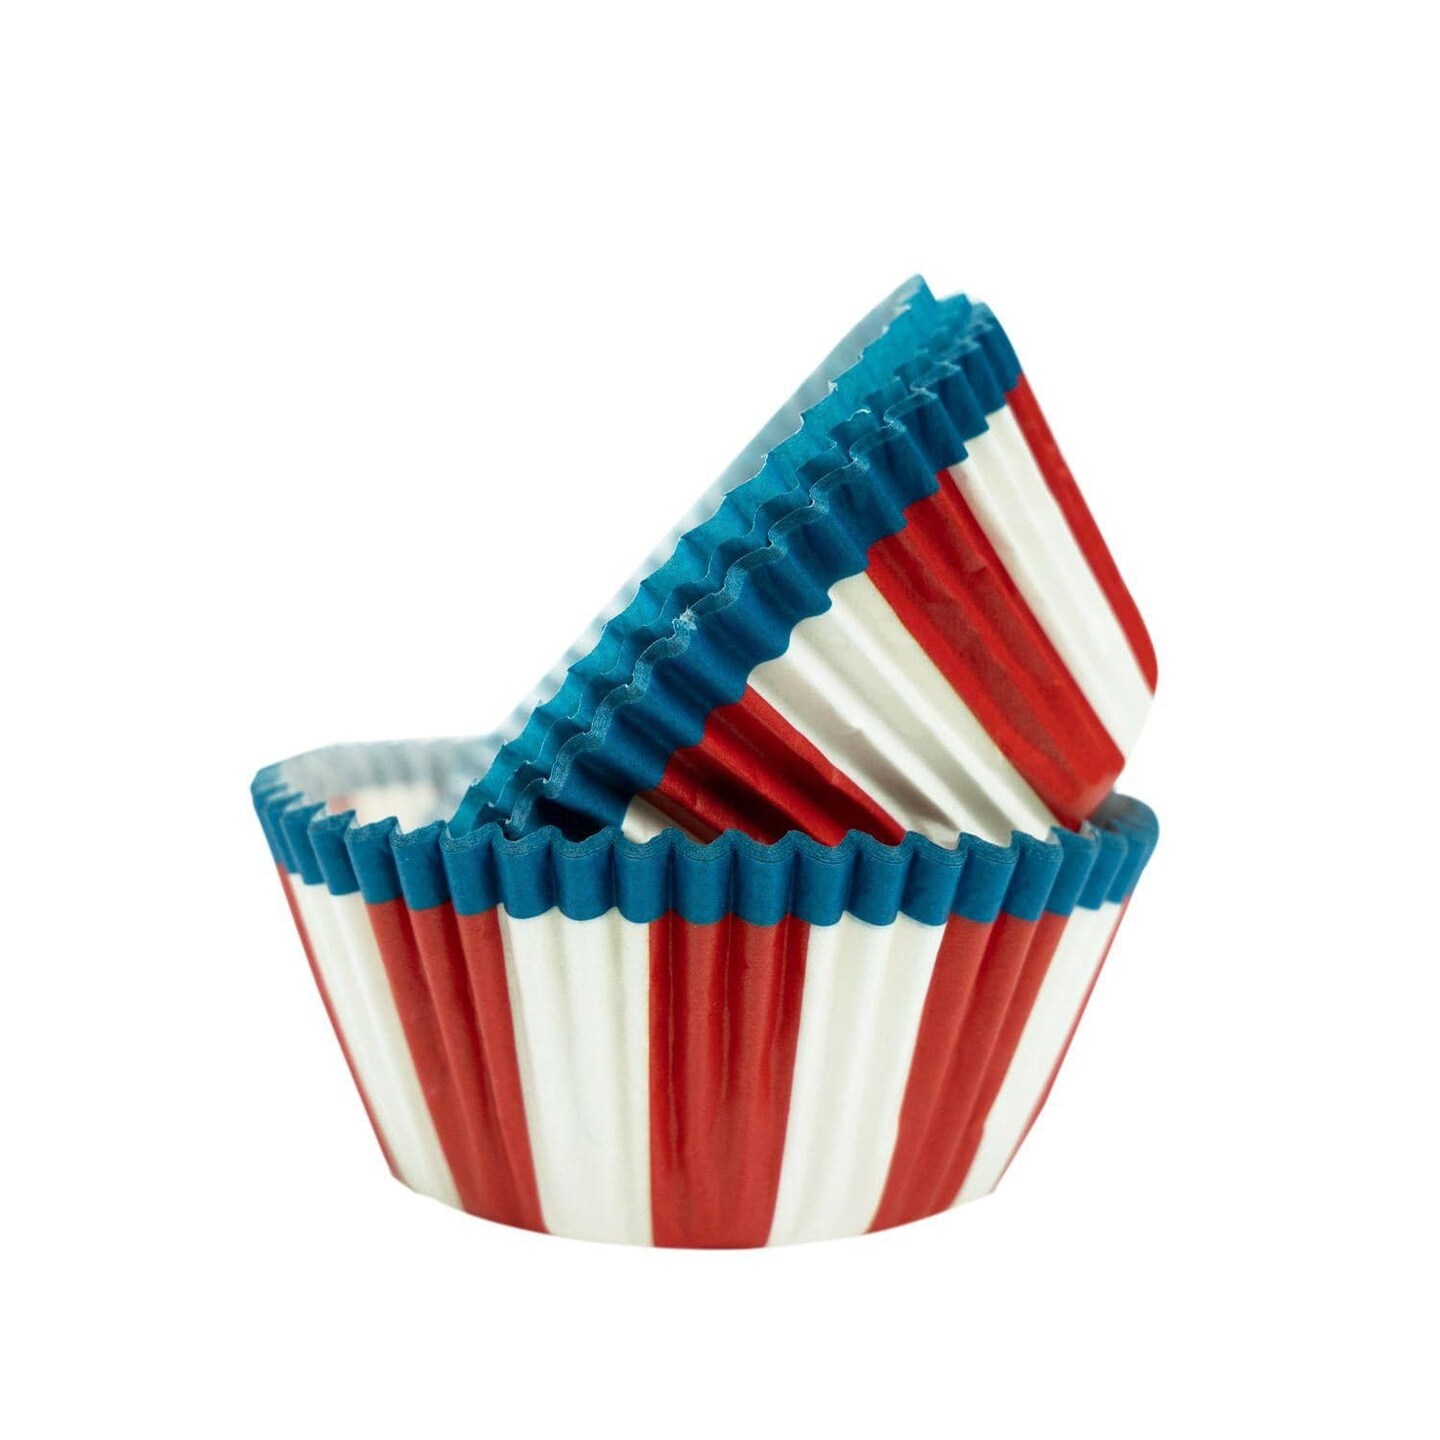 Red, White &#x26; Blue Pin Wheel Standard Size Cupcake Wrappers &#x26; Liners | 25 PC Set